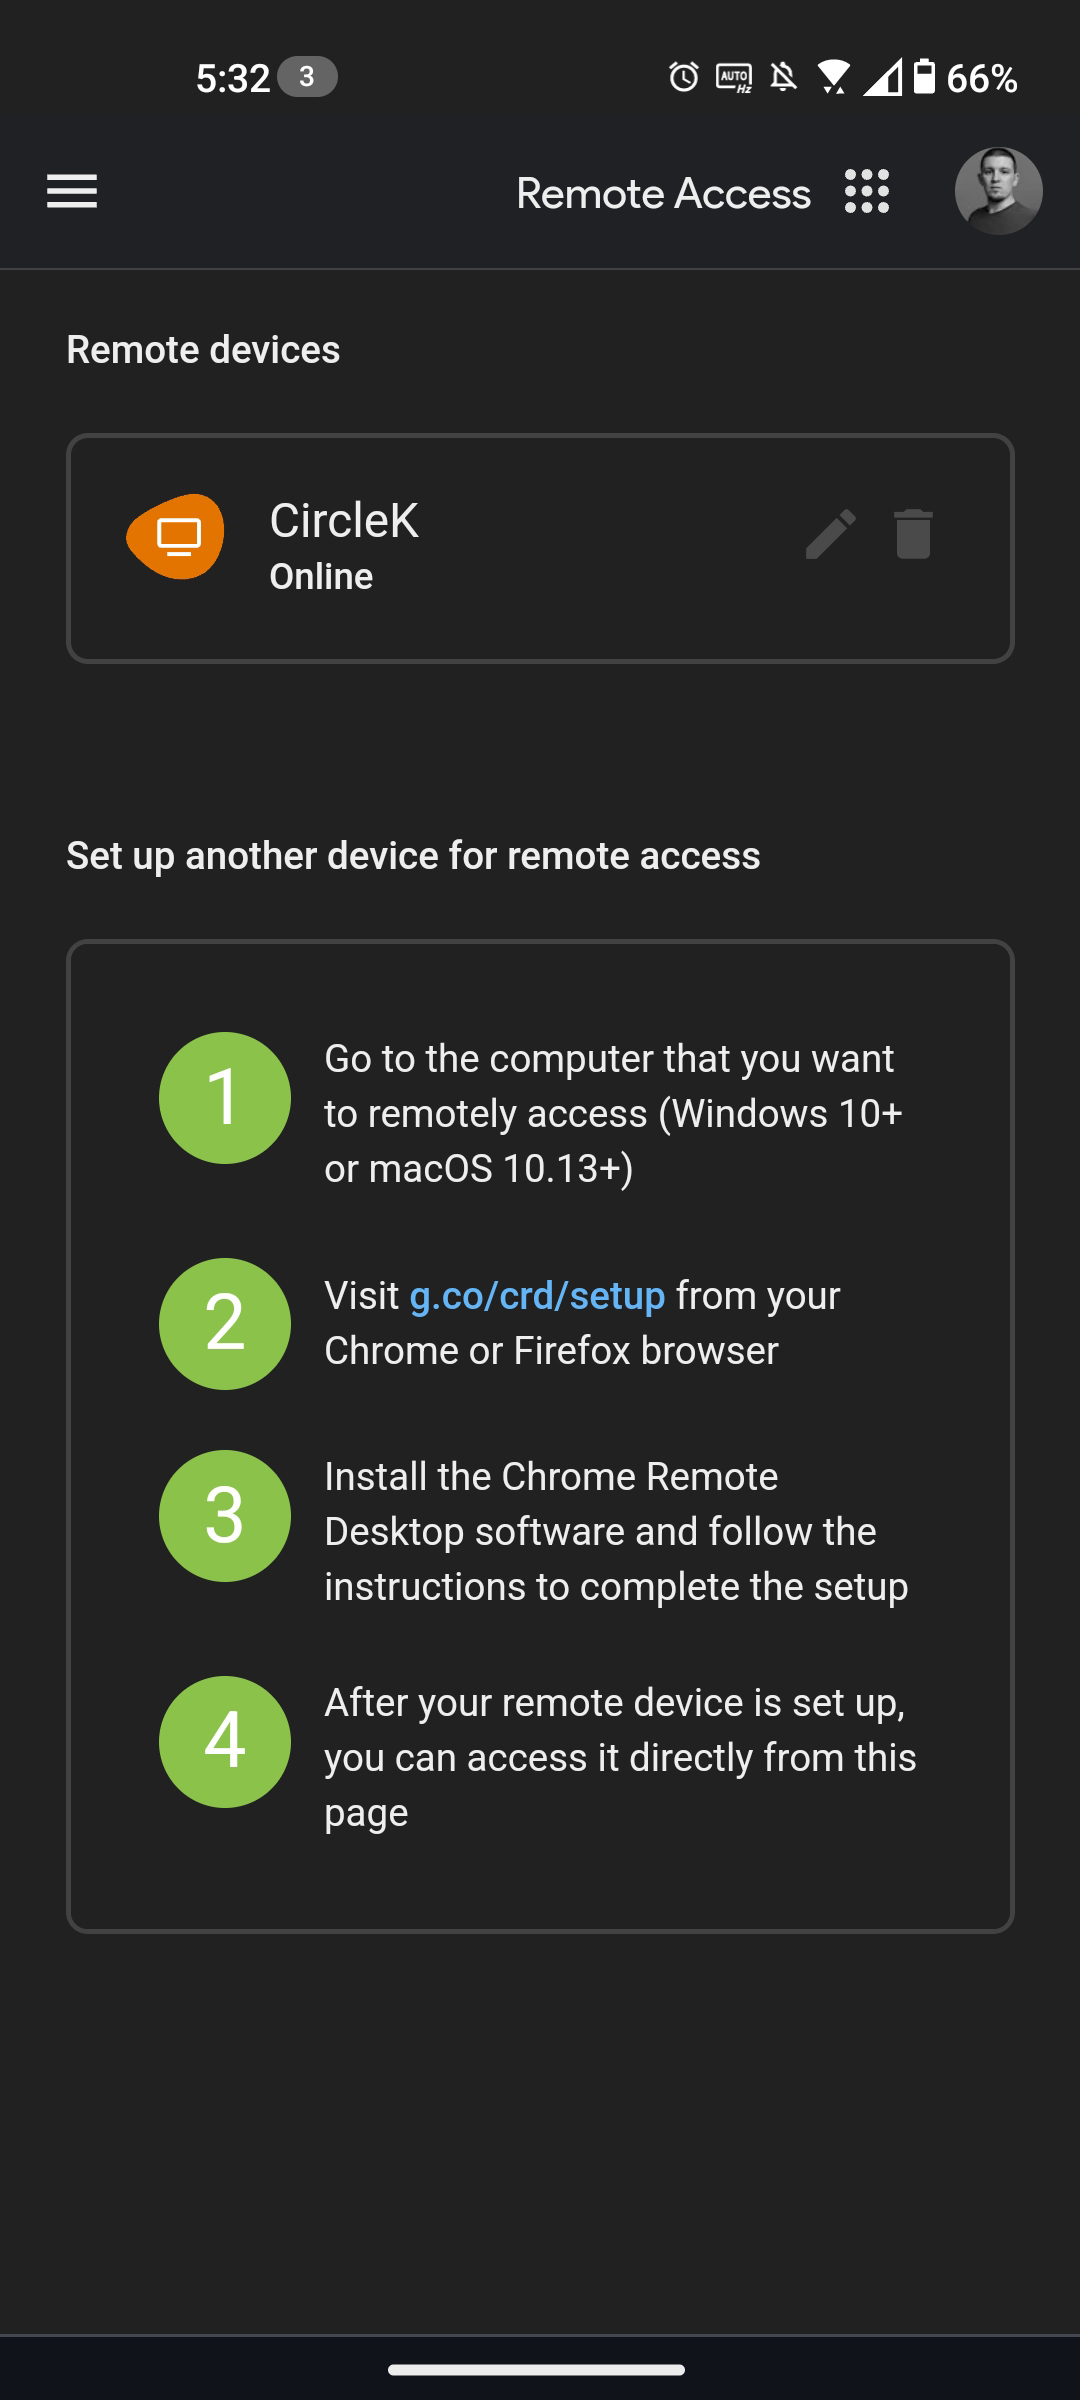 Connecting to a desktop PC remotely using Chrome Remote Desktop.